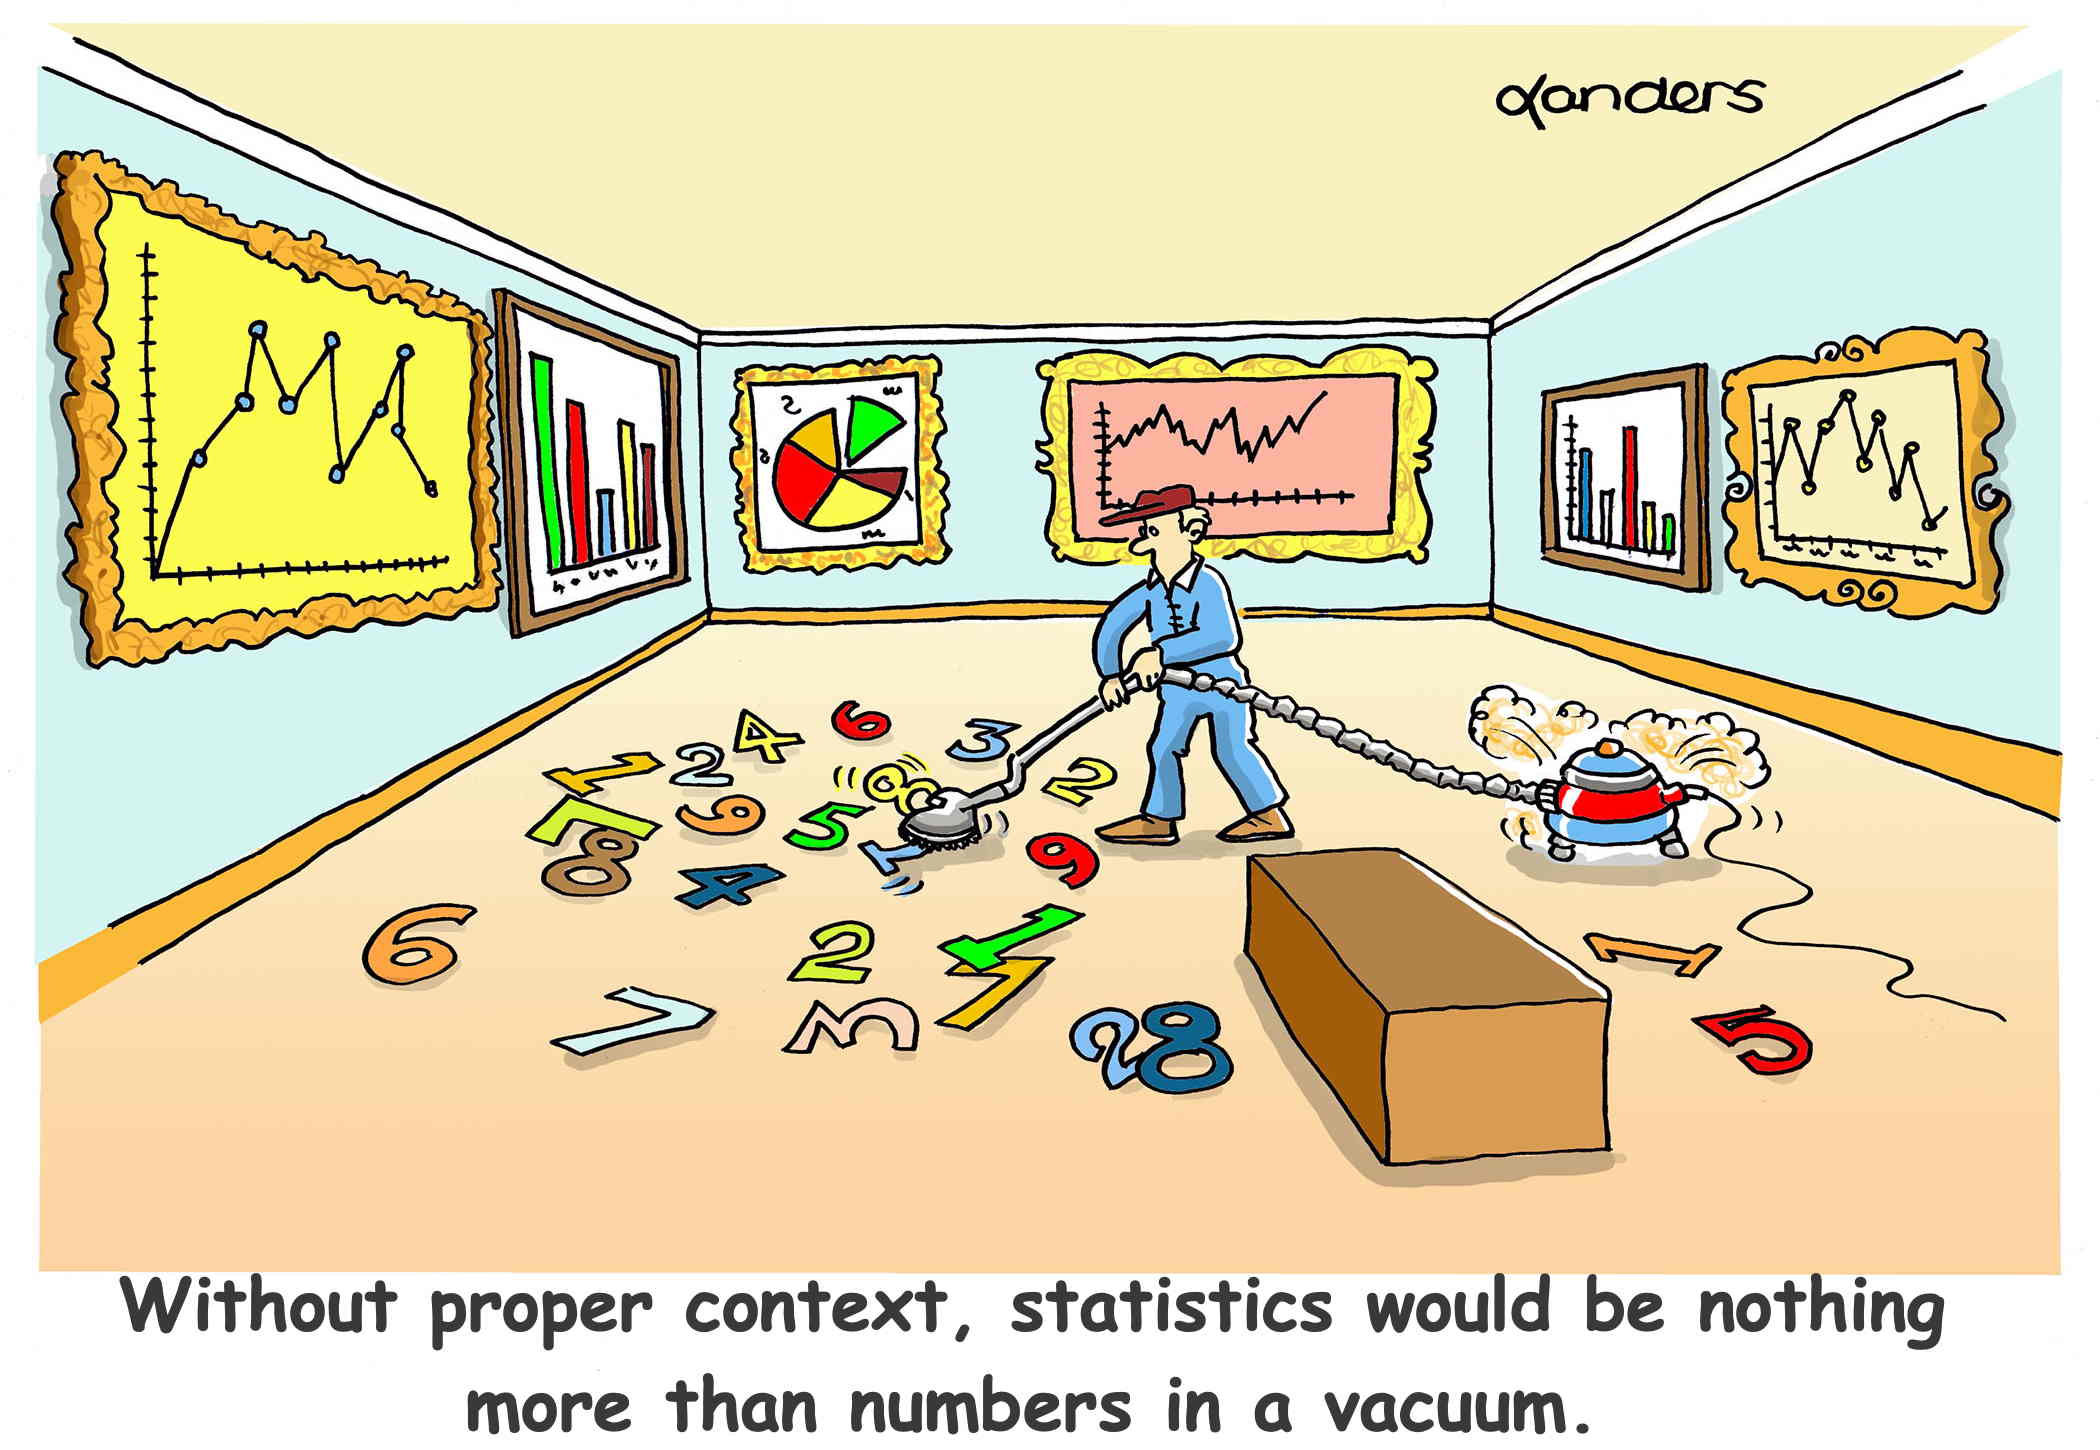 cartoon showing museum with graphs on the wall and janitor is vacuuming up numbers off the floor.  Caption says: "Without proper context, statistics would be nothing more than numbers in a vacuum."